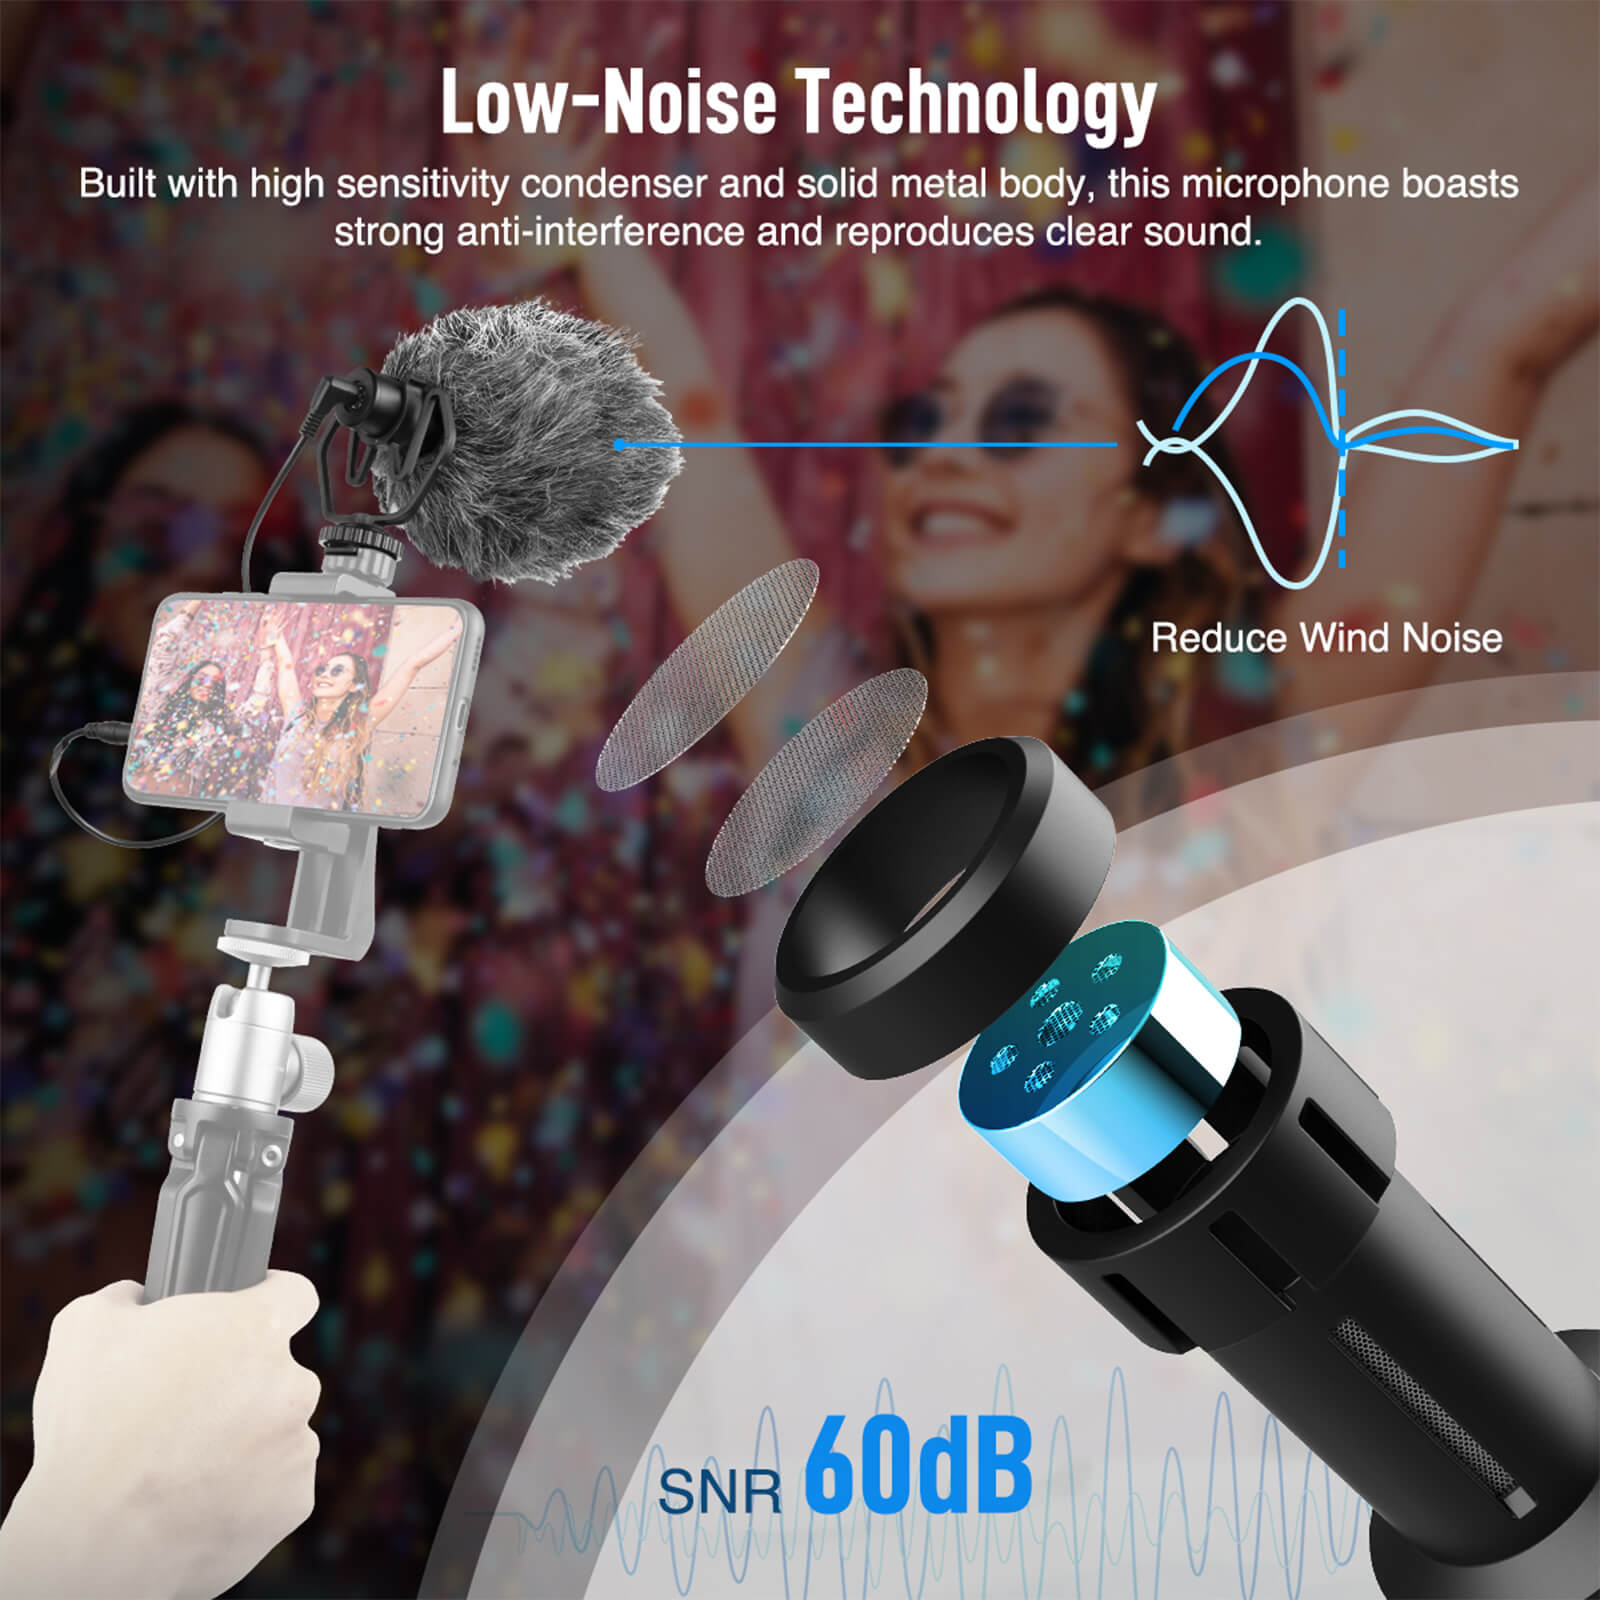 Moman MA1 of low-noise technology